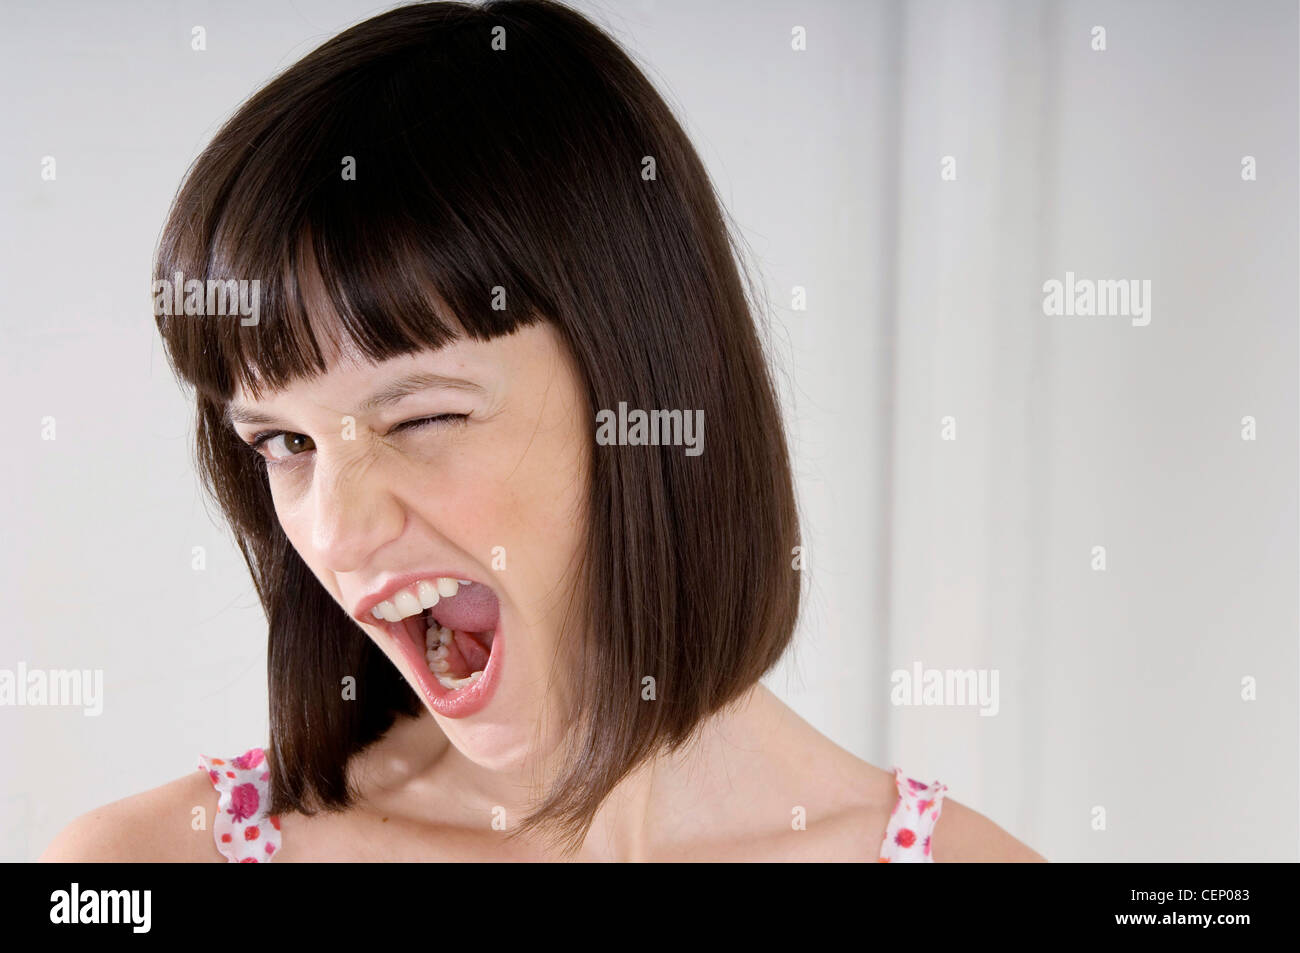 Female with brunette hair head titled sideways looking to camera winking mouth wide open showing teeth  RBO Stock Photo